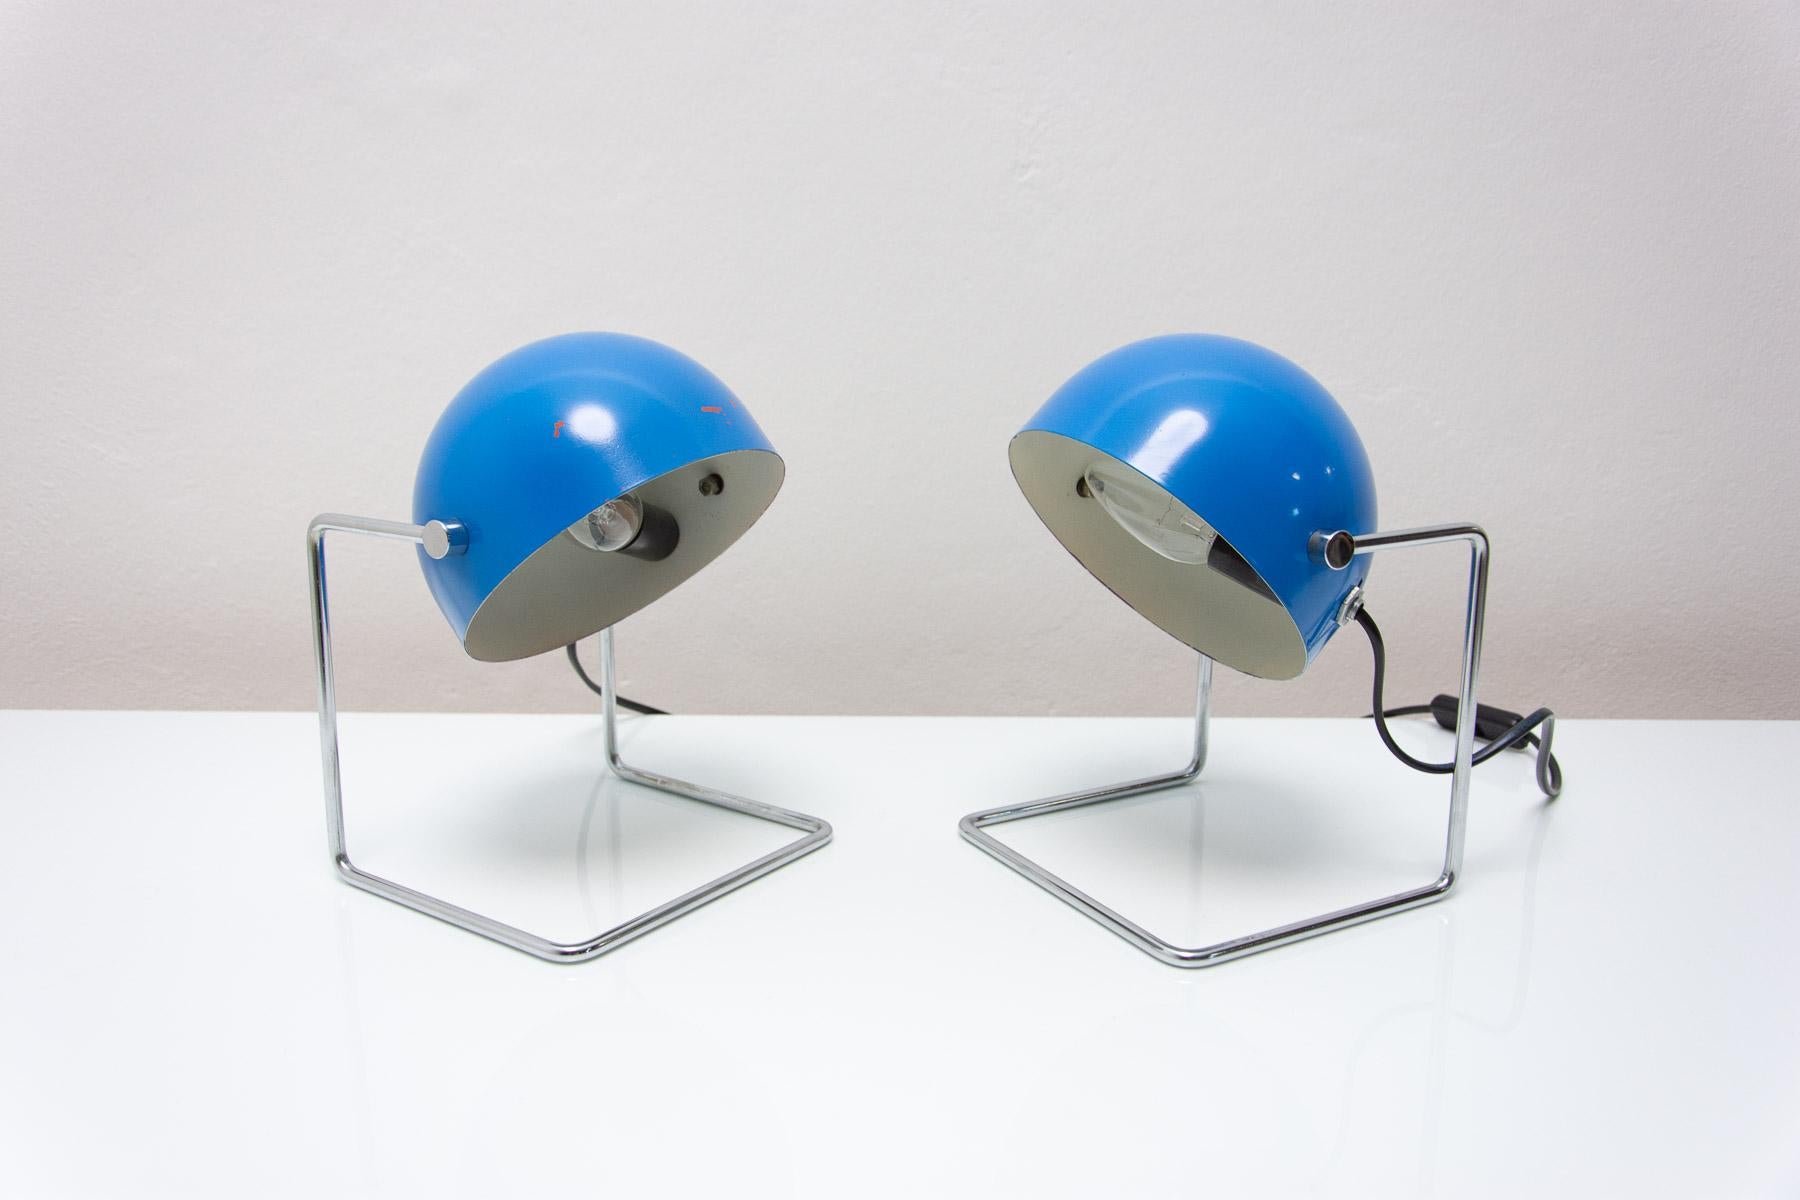 Czech  Pair of Midcentury Space-Age Positioning Desk Lamps, 1960s